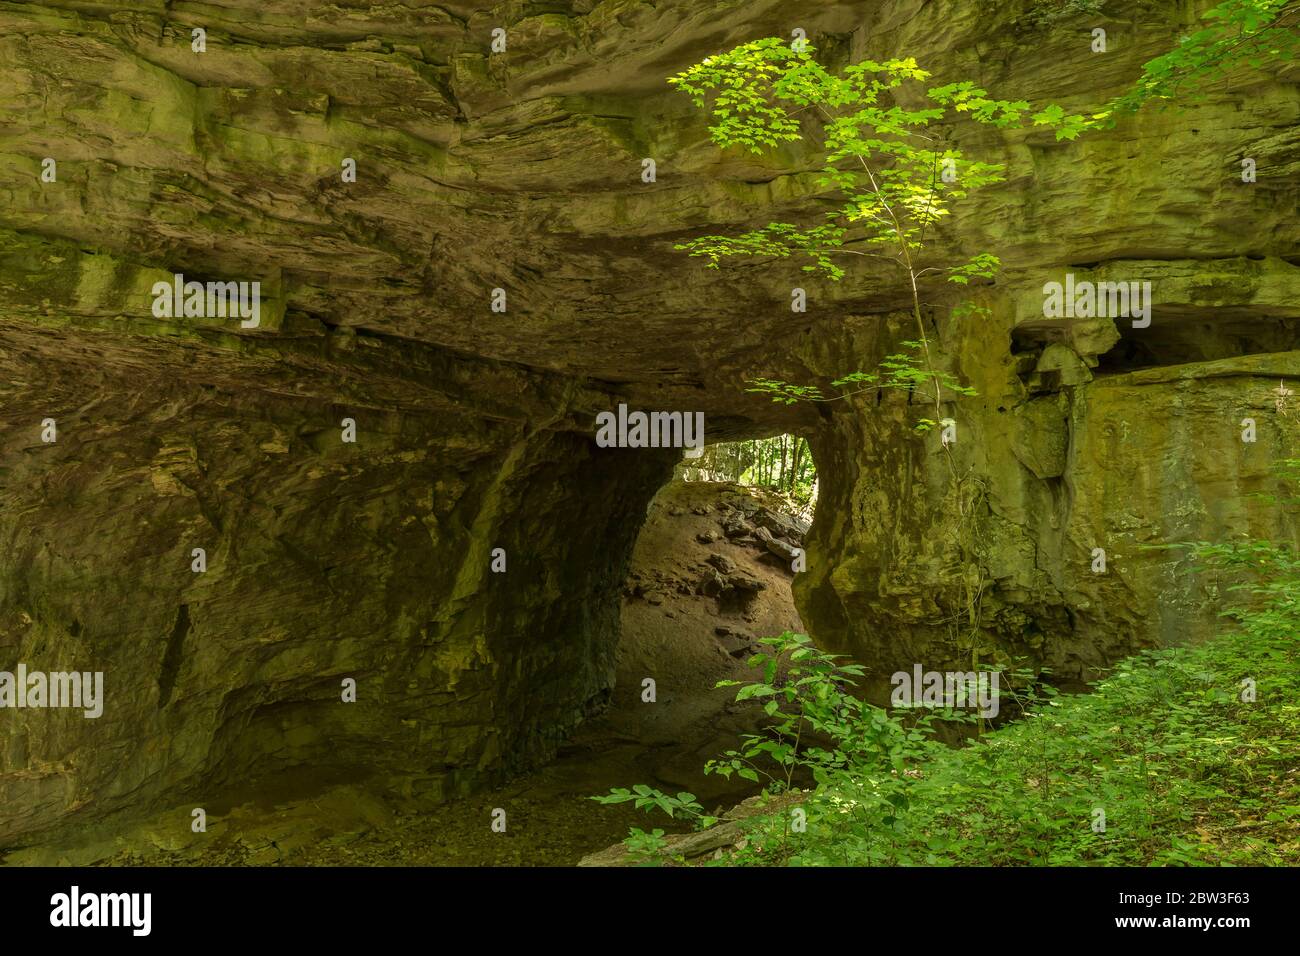 A Natural Bridge In The Woods Stock Photo